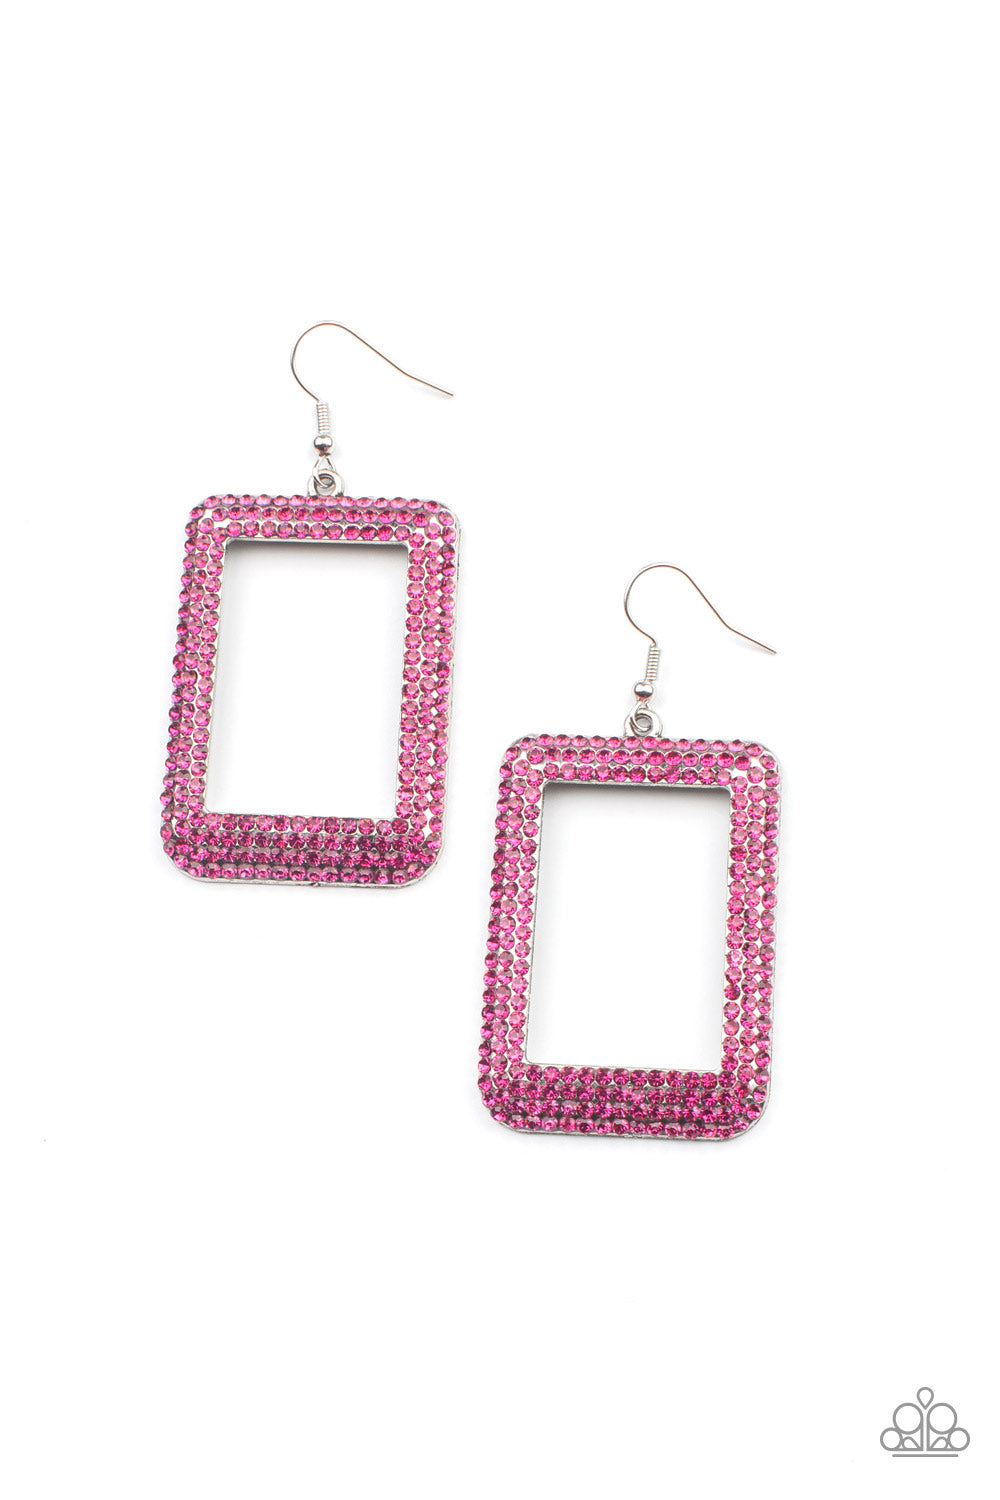 Paparazzi World FRAME-ous - Pink Earrings - A Finishing Touch Jewelry